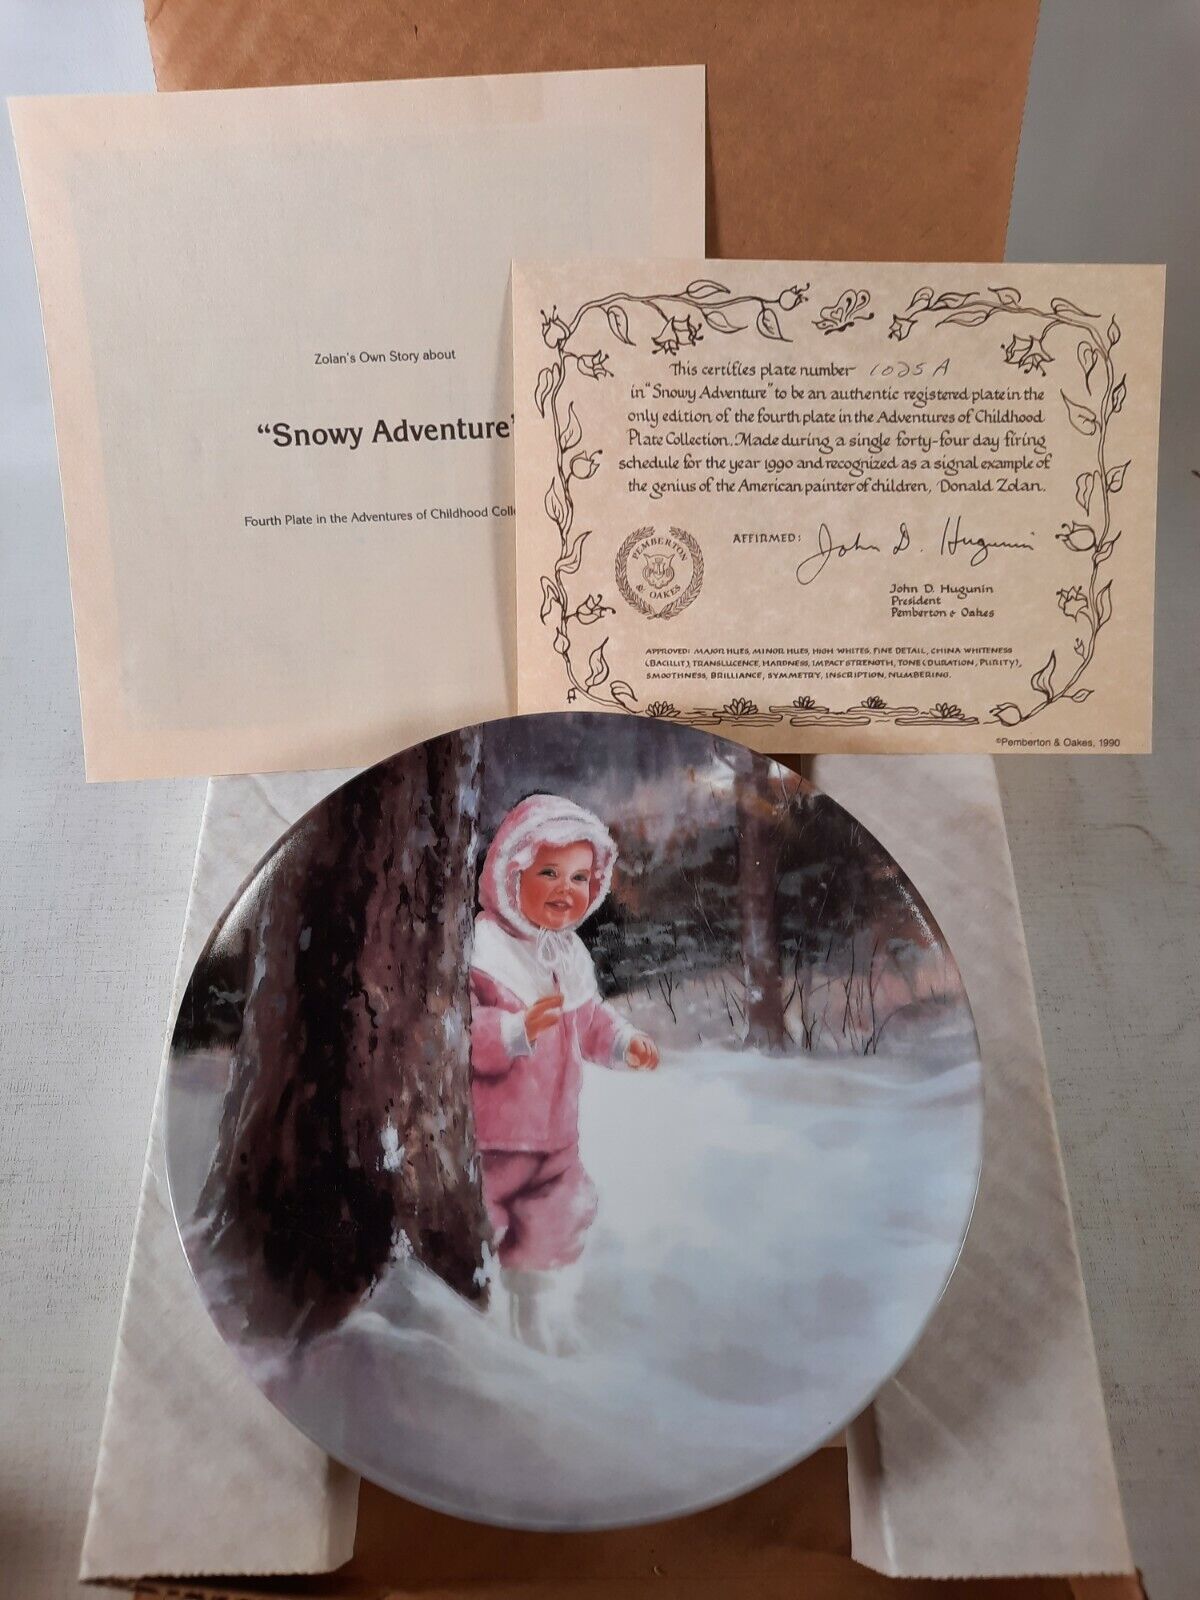 Backyard Discovery collector plate snowy adventure Collection Donald Zolan 1990